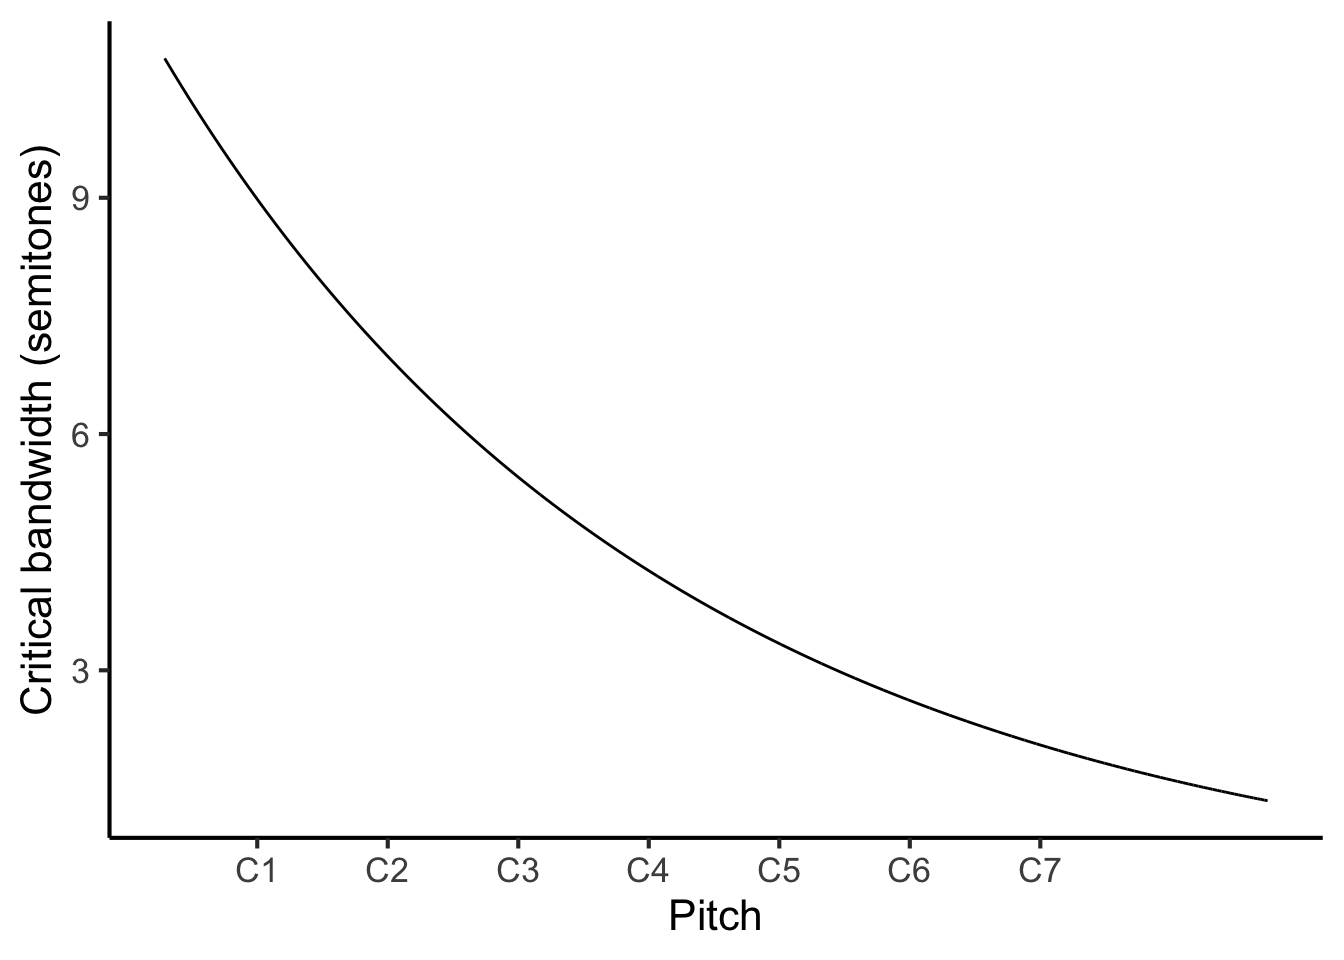 Critical bandwidth as a function of pitch.